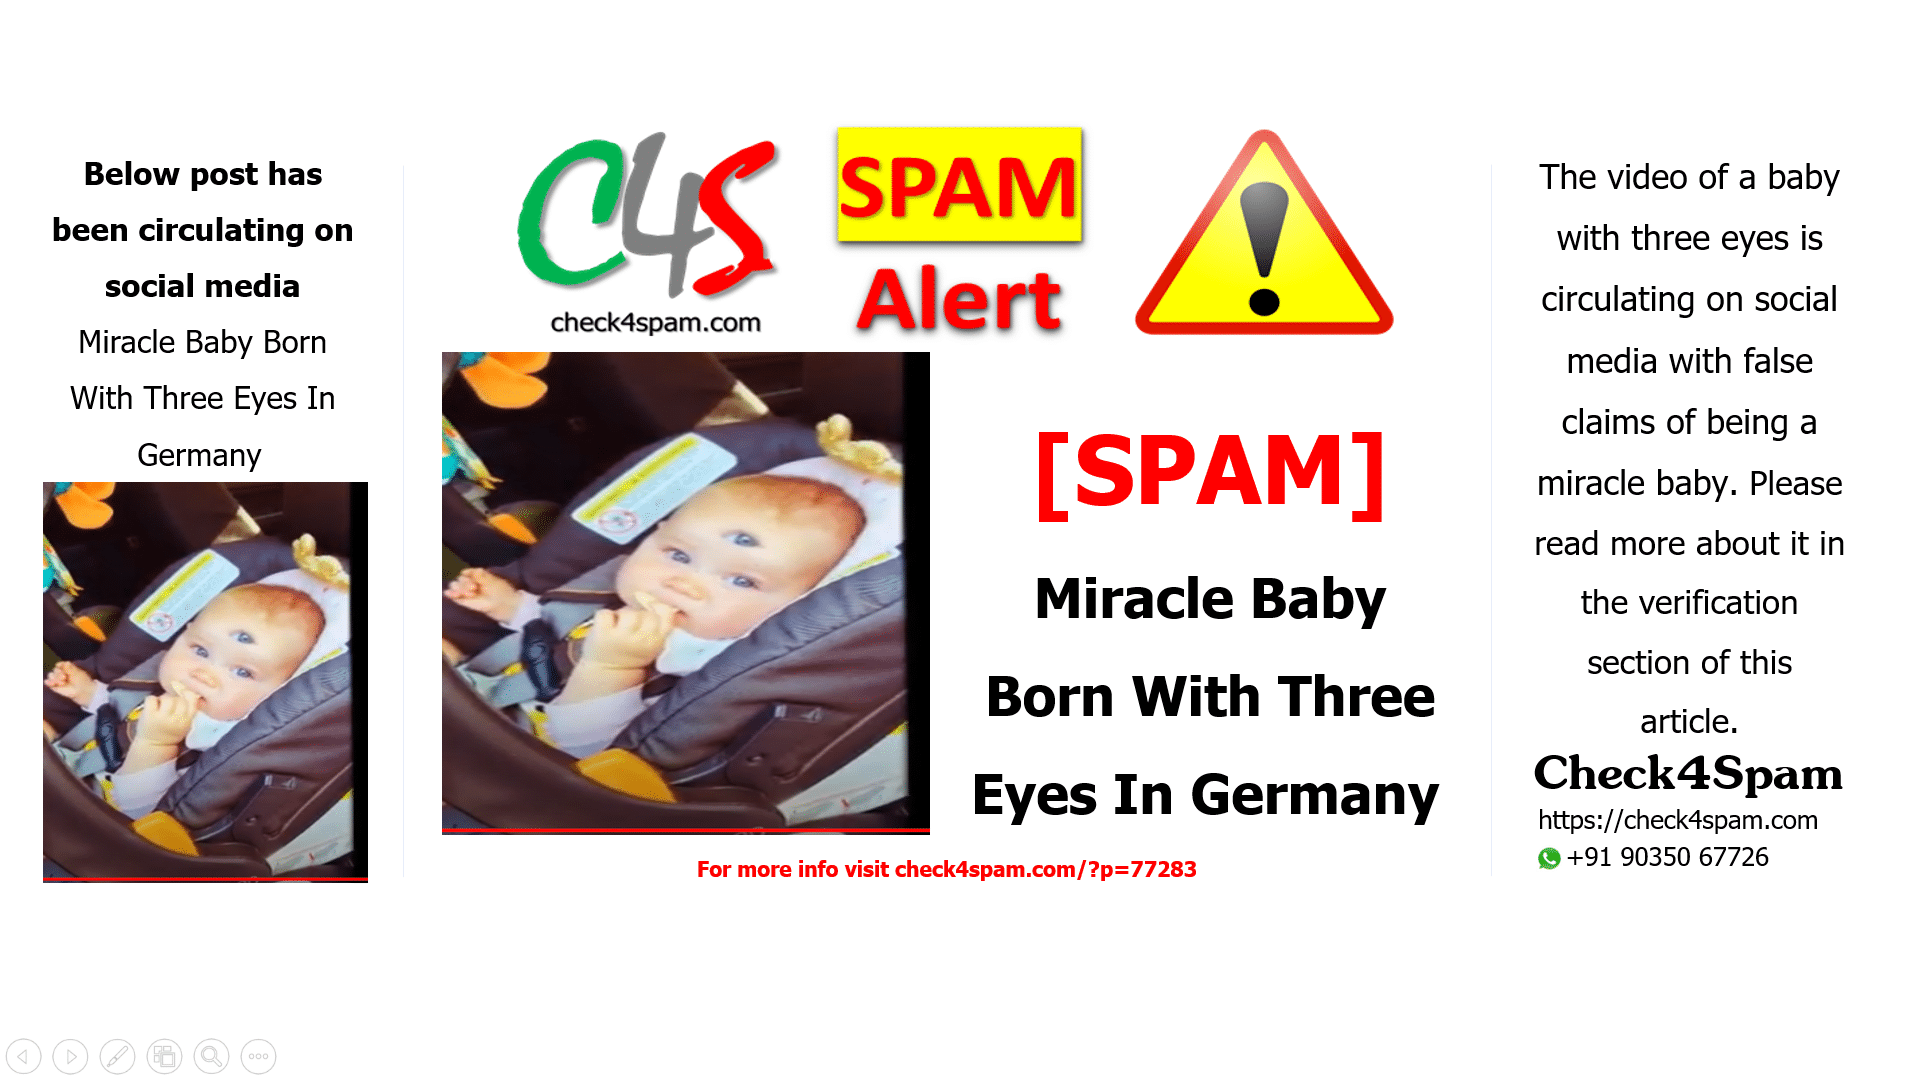 Miracle Baby Born With Three Eyes In Germany